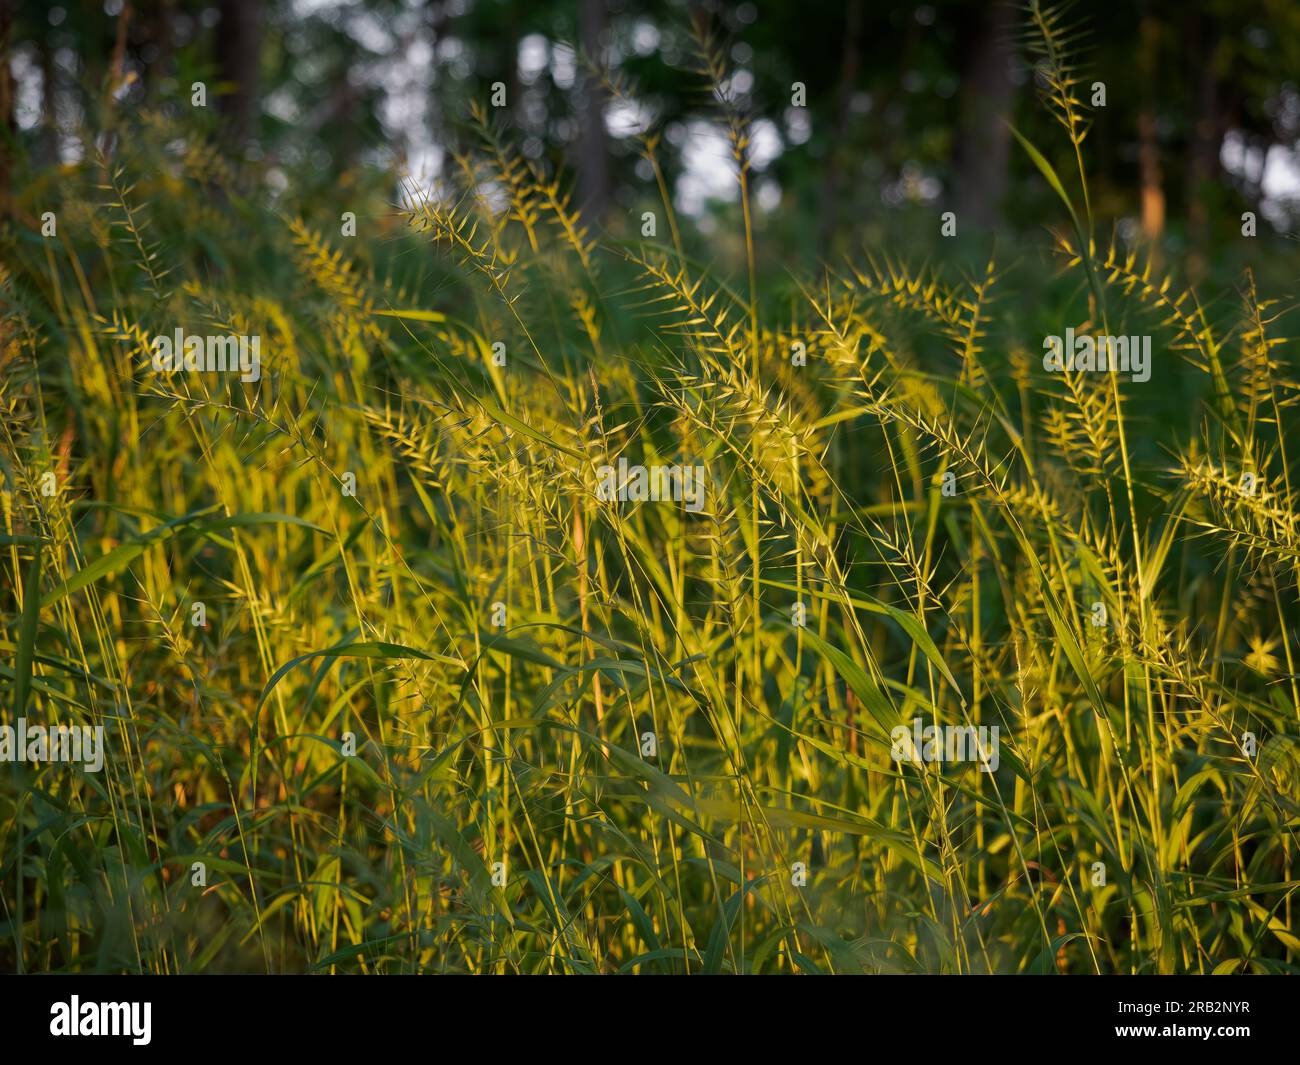 A field of sunlit golden Eastern Bottlebrush Grass or Elymus hystrix photographed in Minnesota with a shallow depth of field. Stock Photo